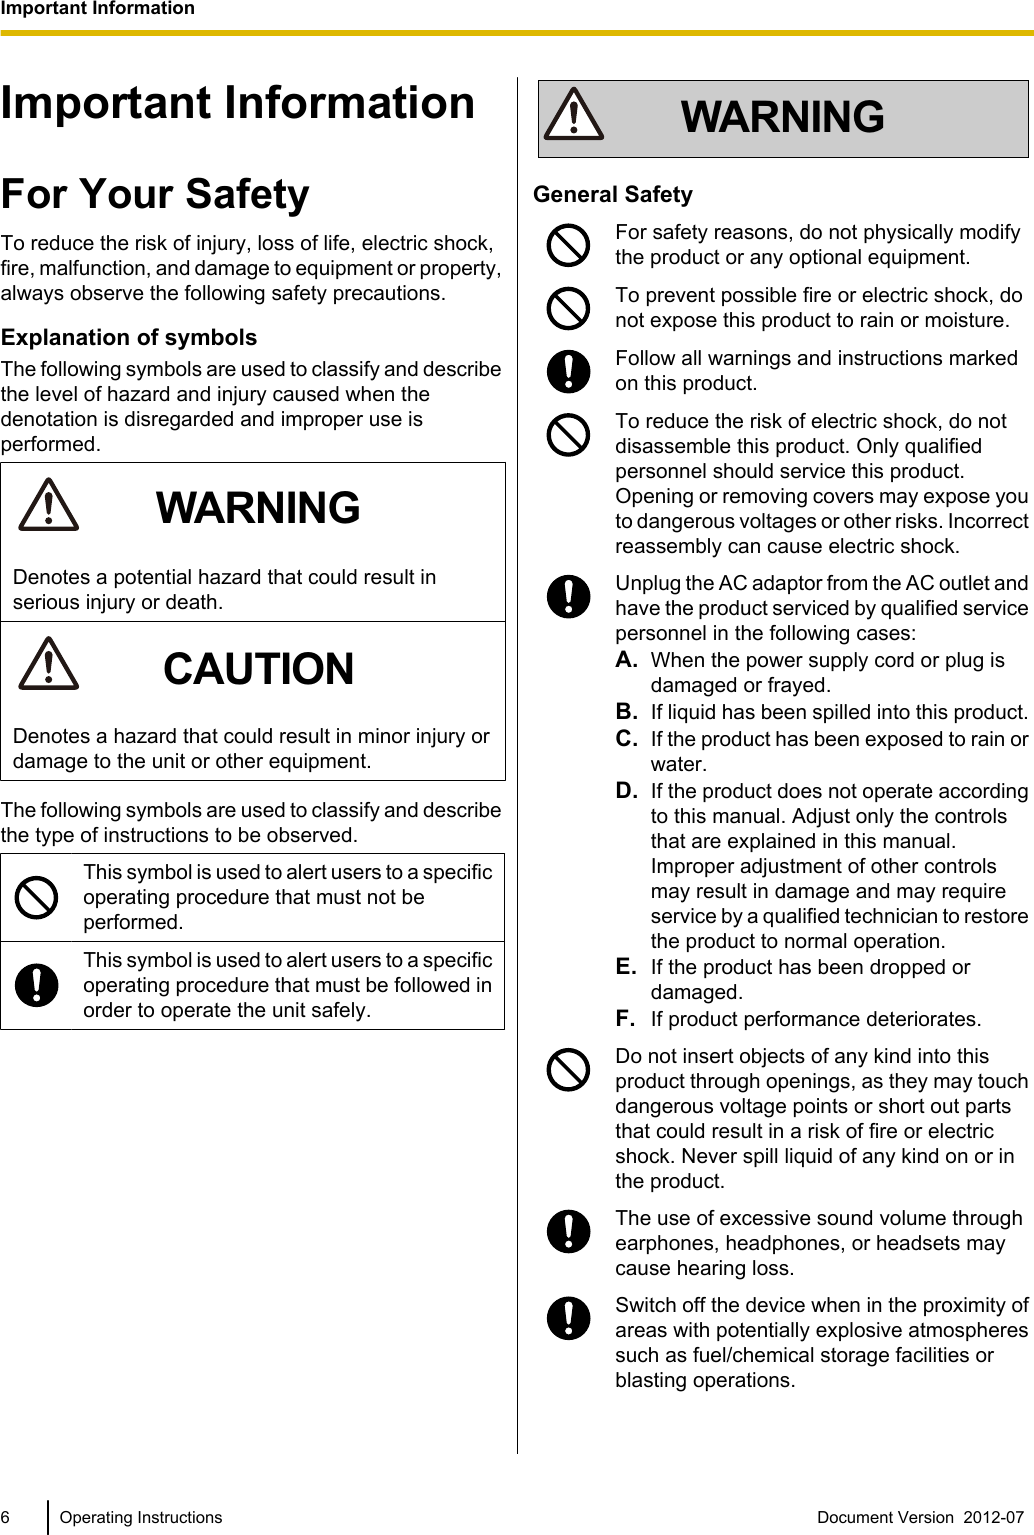 Important InformationFor Your SafetyTo reduce the risk of injury, loss of life, electric shock,fire, malfunction, and damage to equipment or property,always observe the following safety precautions.Explanation of symbolsThe following symbols are used to classify and describethe level of hazard and injury caused when thedenotation is disregarded and improper use isperformed.WARNINGDenotes a potential hazard that could result inserious injury or death.CAUTIONDenotes a hazard that could result in minor injury ordamage to the unit or other equipment.The following symbols are used to classify and describethe type of instructions to be observed.This symbol is used to alert users to a specificoperating procedure that must not beperformed.This symbol is used to alert users to a specificoperating procedure that must be followed inorder to operate the unit safely.WARNINGGeneral SafetyFor safety reasons, do not physically modifythe product or any optional equipment.To prevent possible fire or electric shock, donot expose this product to rain or moisture.Follow all warnings and instructions markedon this product.To reduce the risk of electric shock, do notdisassemble this product. Only qualifiedpersonnel should service this product.Opening or removing covers may expose youto dangerous voltages or other risks. Incorrectreassembly can cause electric shock.Unplug the AC adaptor from the AC outlet andhave the product serviced by qualified servicepersonnel in the following cases:A. When the power supply cord or plug isdamaged or frayed.B. If liquid has been spilled into this product.C. If the product has been exposed to rain orwater.D. If the product does not operate accordingto this manual. Adjust only the controlsthat are explained in this manual.Improper adjustment of other controlsmay result in damage and may requireservice by a qualified technician to restorethe product to normal operation.E. If the product has been dropped ordamaged.F. If product performance deteriorates.Do not insert objects of any kind into thisproduct through openings, as they may touchdangerous voltage points or short out partsthat could result in a risk of fire or electricshock. Never spill liquid of any kind on or inthe product.The use of excessive sound volume throughearphones, headphones, or headsets maycause hearing loss.Switch off the device when in the proximity ofareas with potentially explosive atmospheressuch as fuel/chemical storage facilities orblasting operations.6 Operating Instructions Document Version  2012-07  Important Information